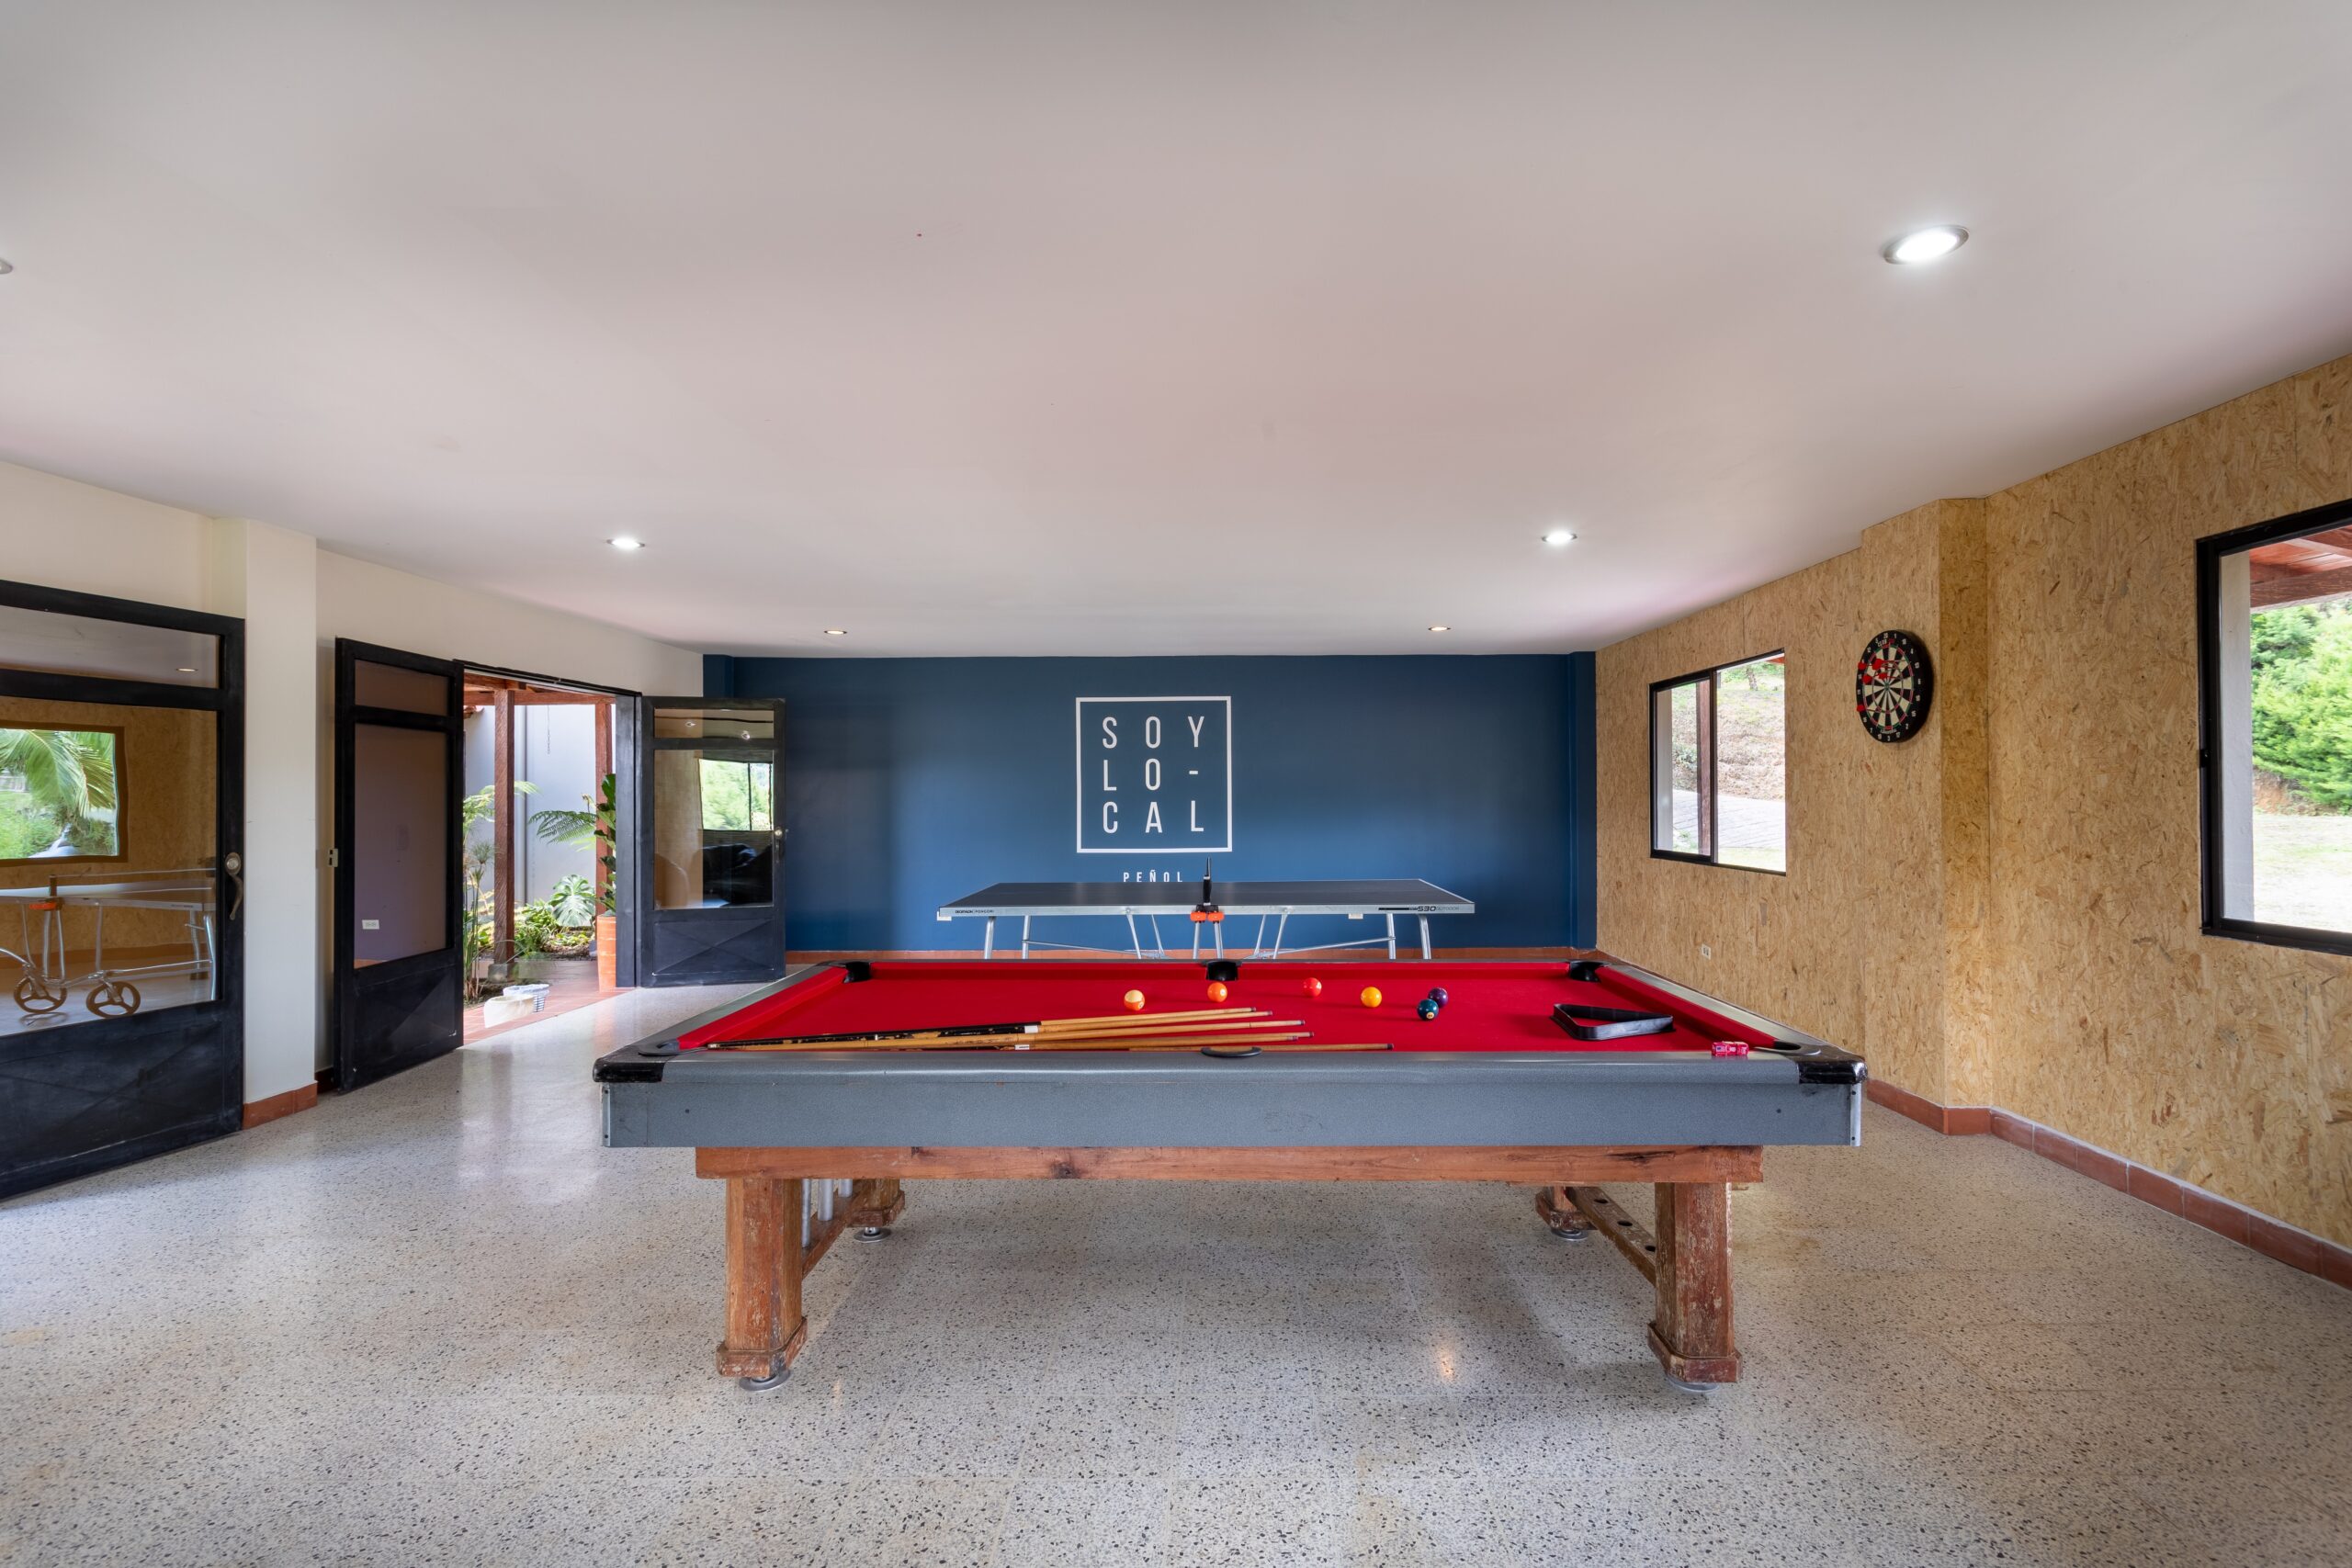 A pool table for cool man cave ideas. Pictured: A pool table.